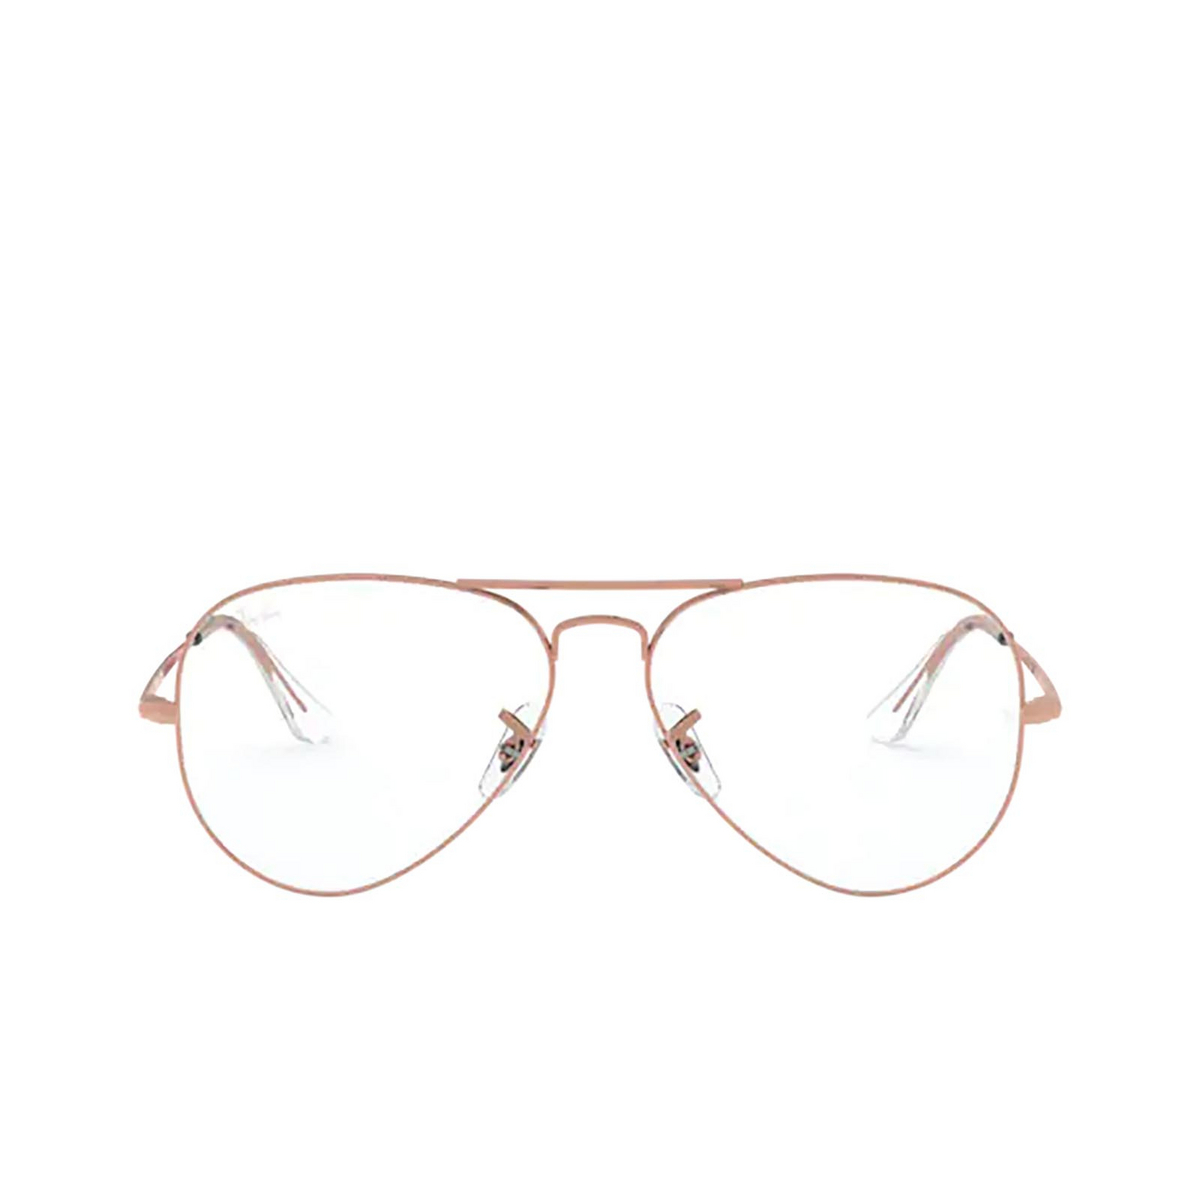 Ray-Ban® Aviator Eyeglasses: Aviator RX6489 color Rose Gold 3094 - front view.